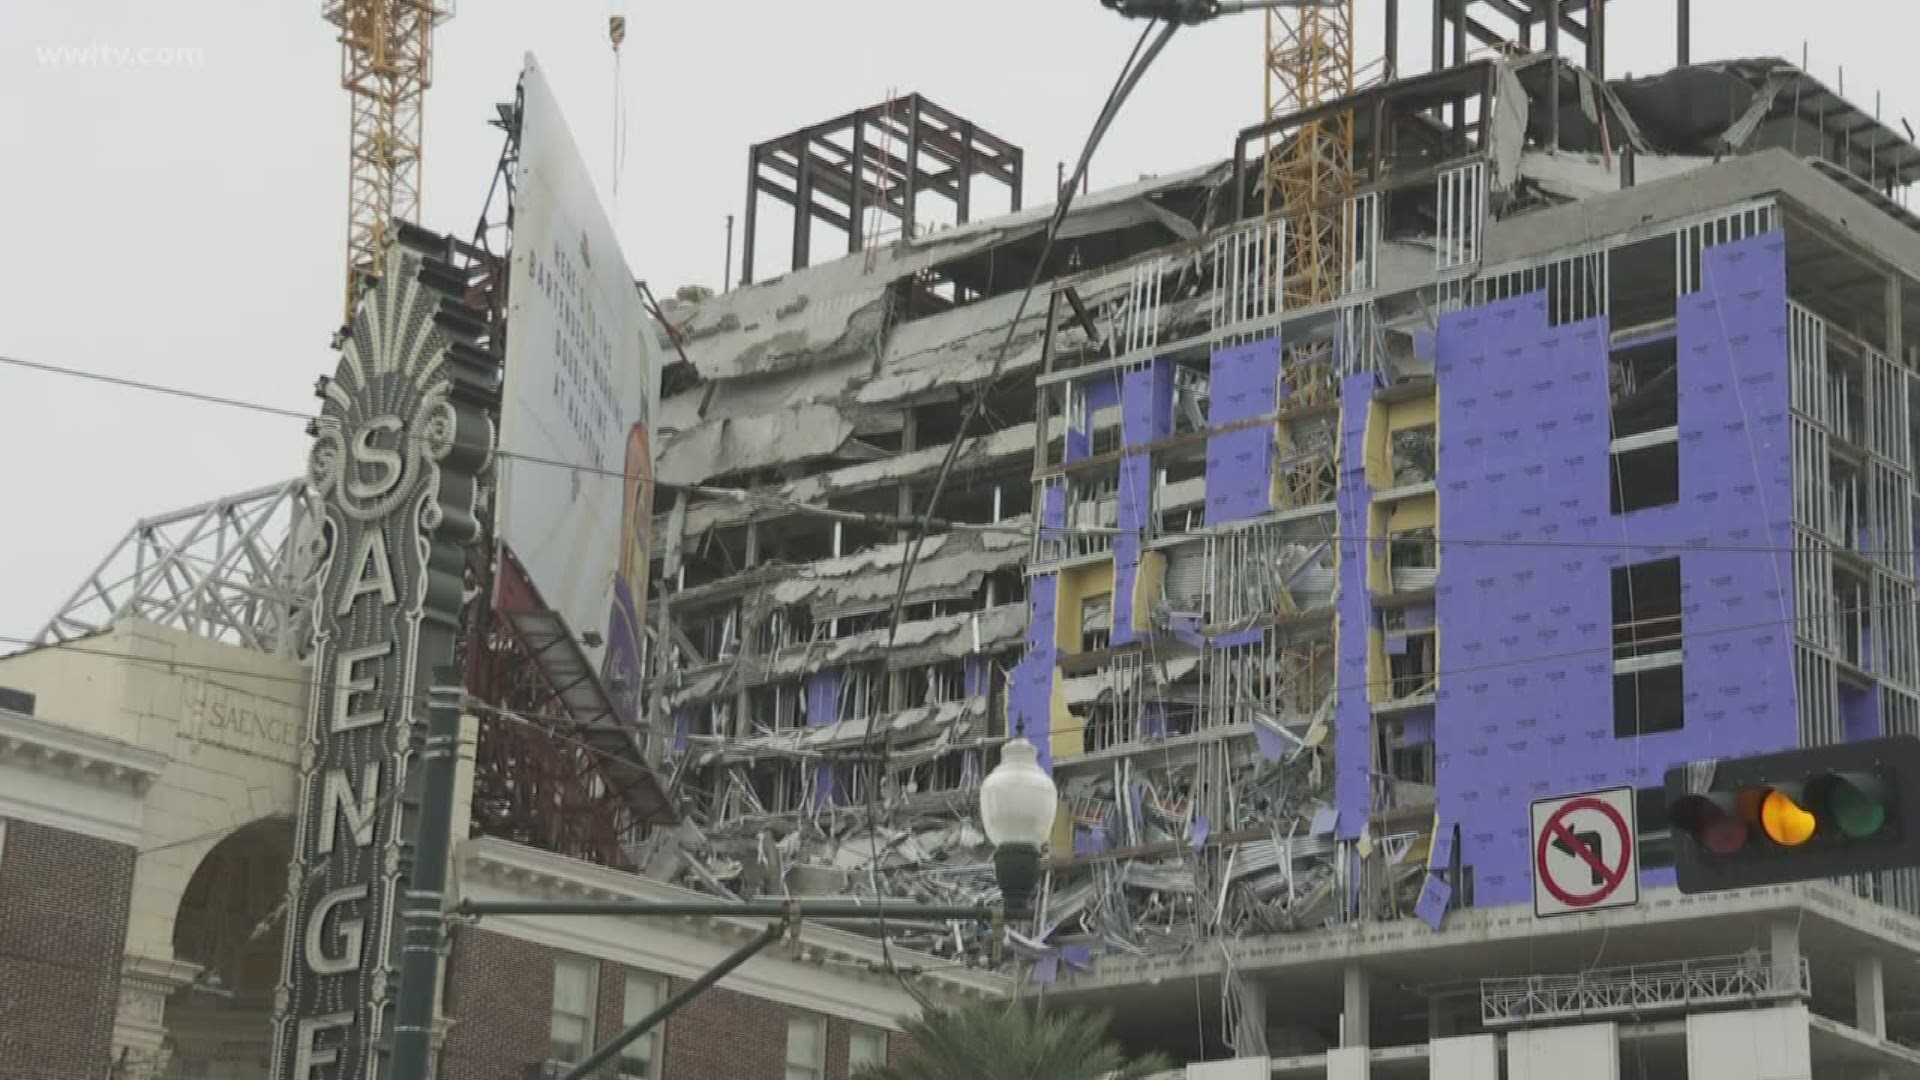 Cause of the Hard Rock Hotel collapse under investigation